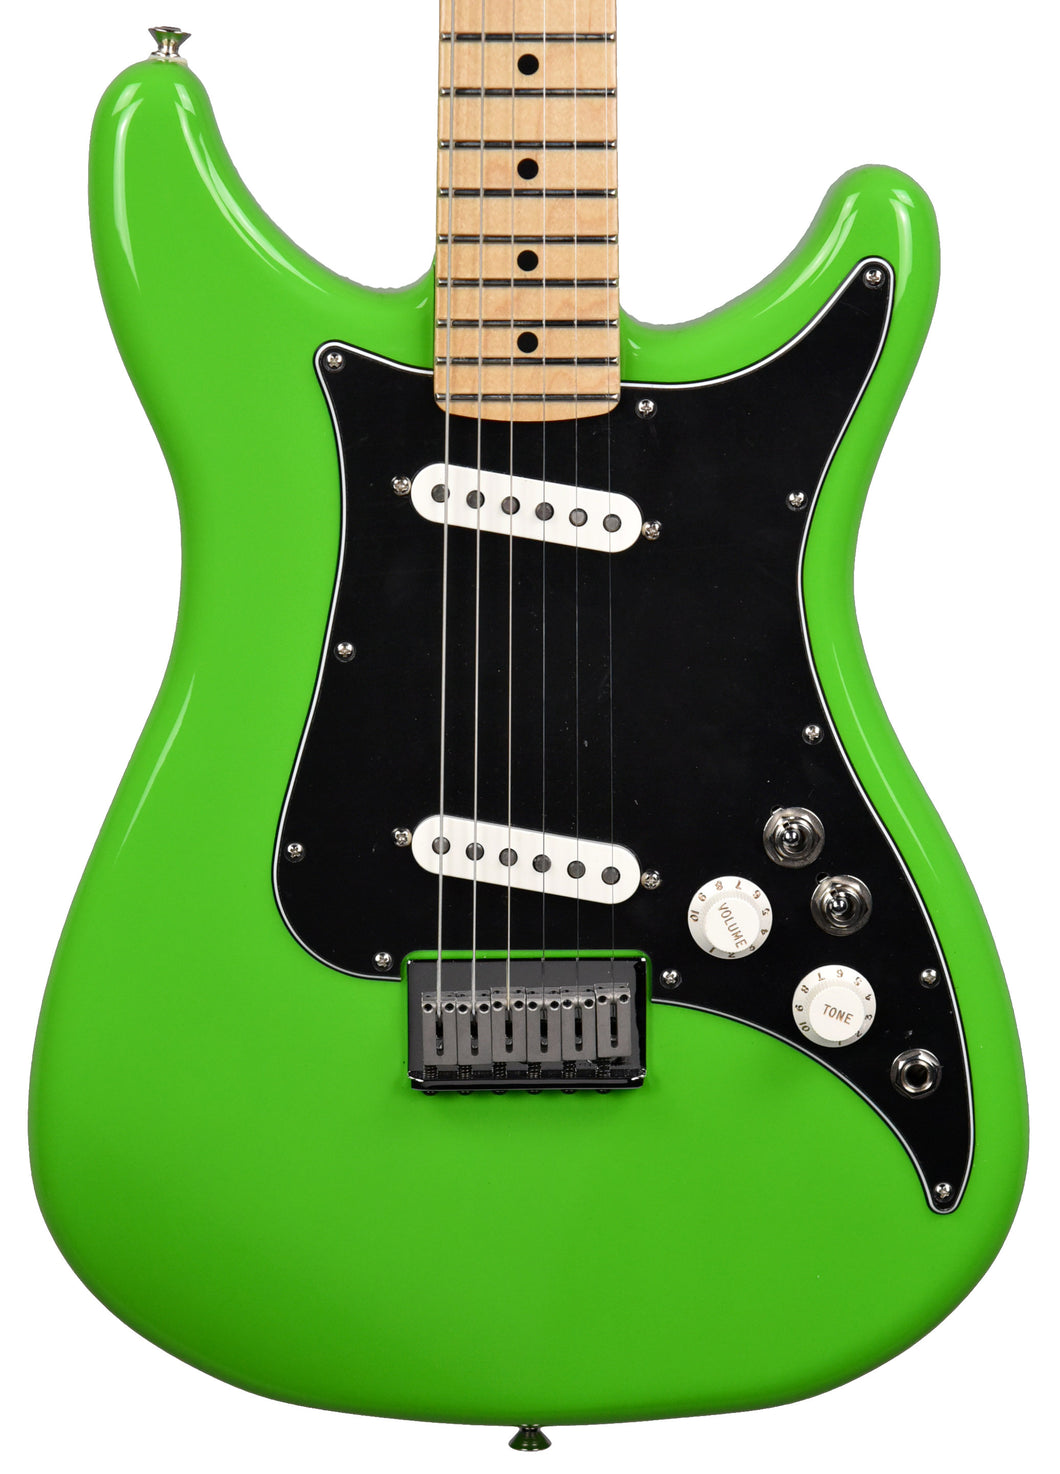 Fender Player Lead II Electric Guitar in Neon Green MX20178144 - The Music Gallery